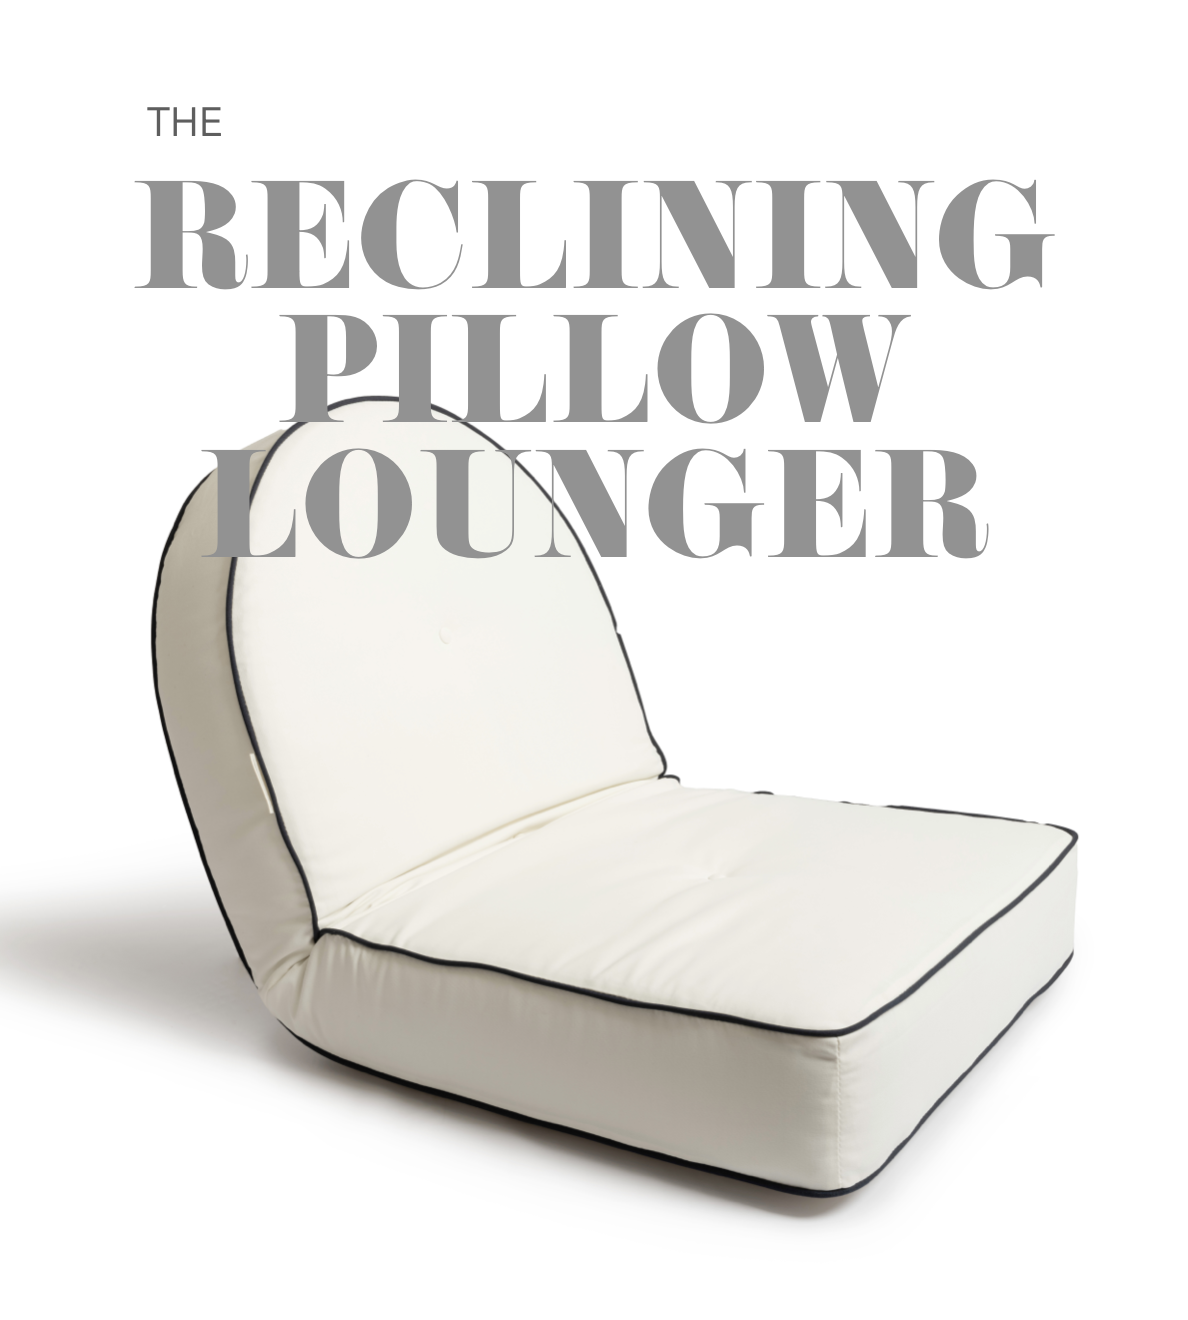 Video of the reclining pillow lounger